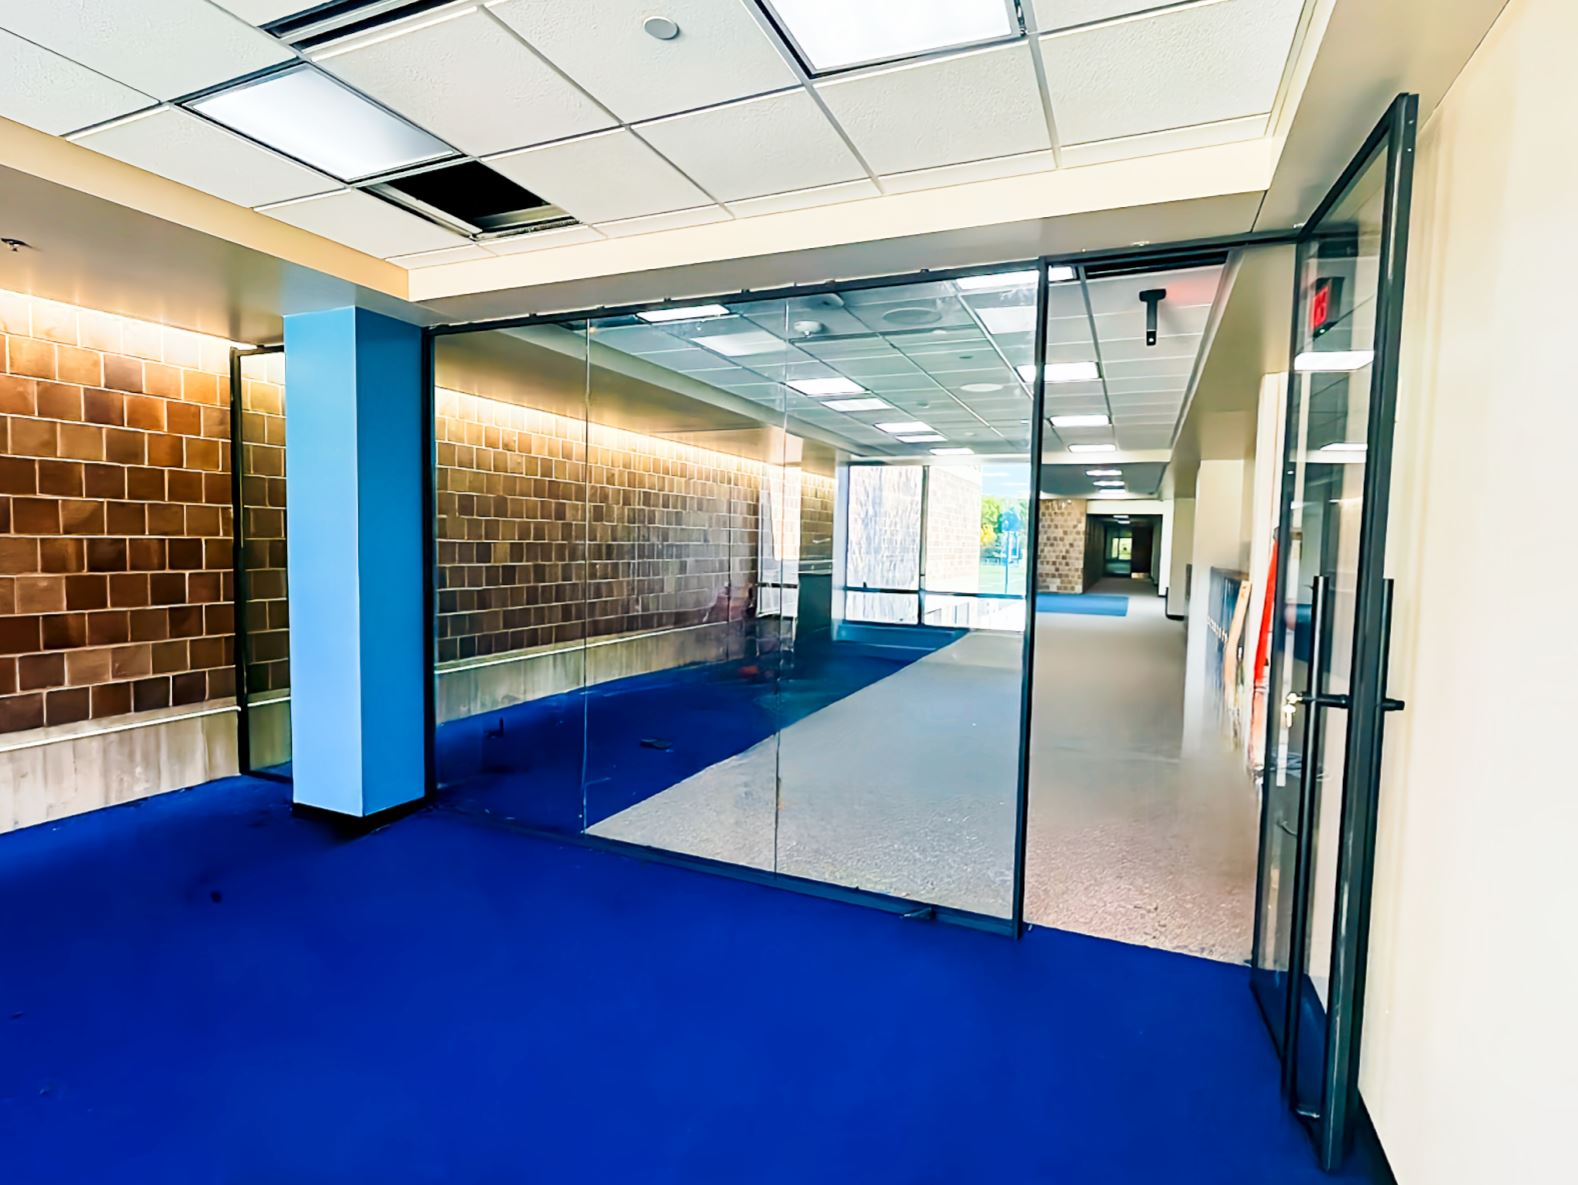 w l hall company Hopkins Senior High & West Junior High Schools Utilize ZONA & Modernfold Glass Walls for Collaborative, Safe and Flexible Learning Environments 5